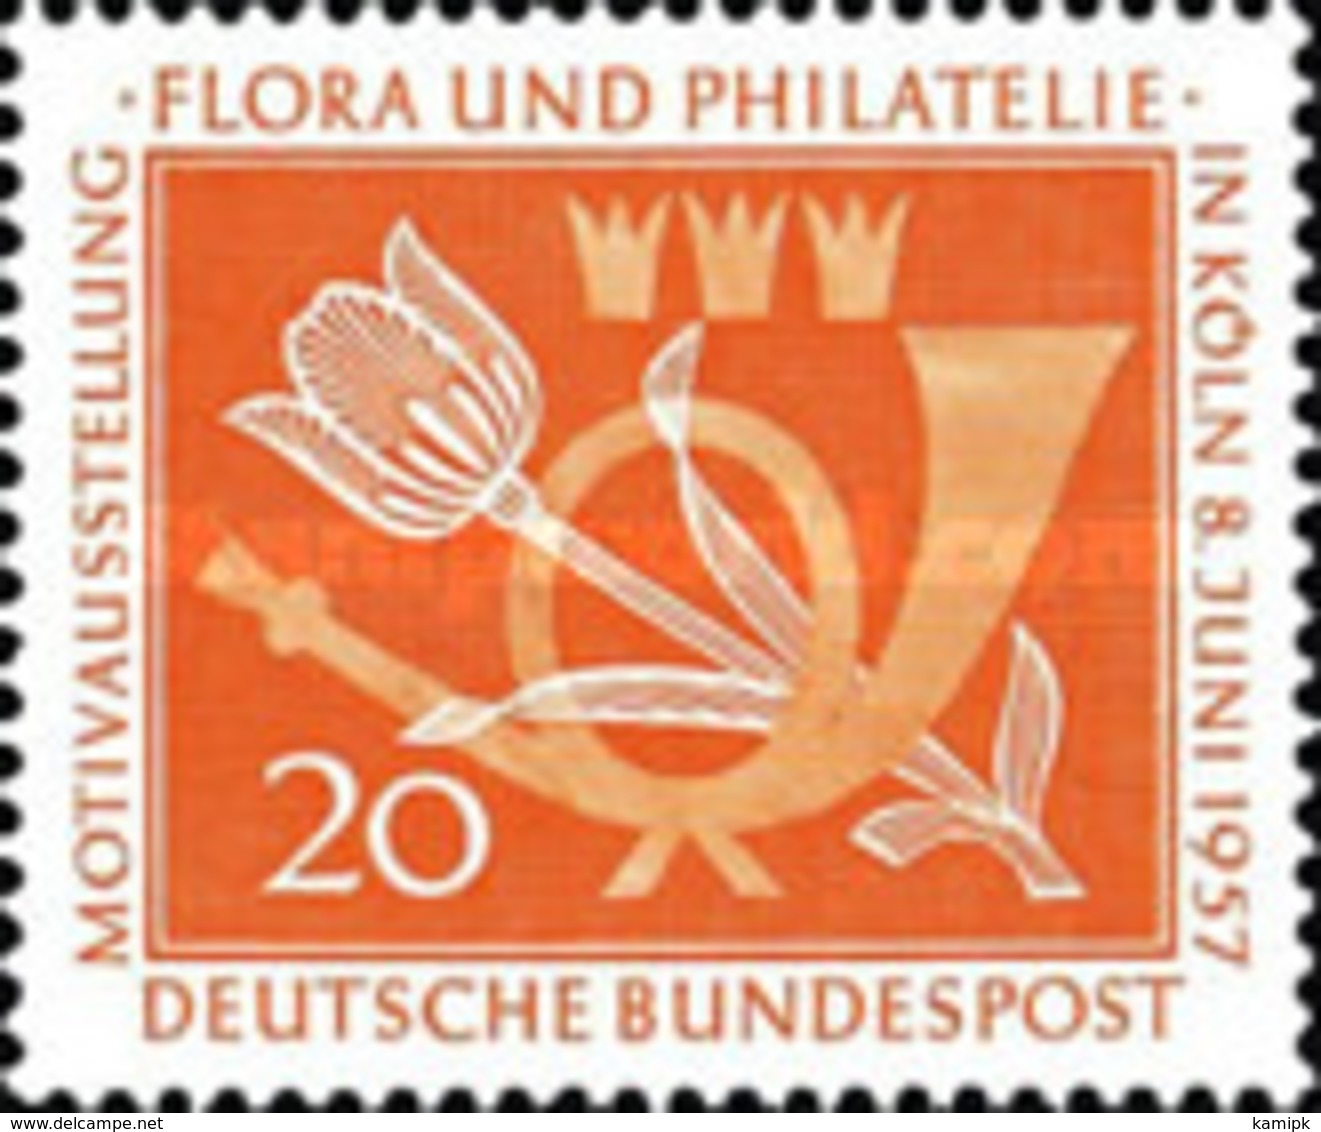 Germany - The Exhibition Of Flora And Philately -1957 - Used Stamps